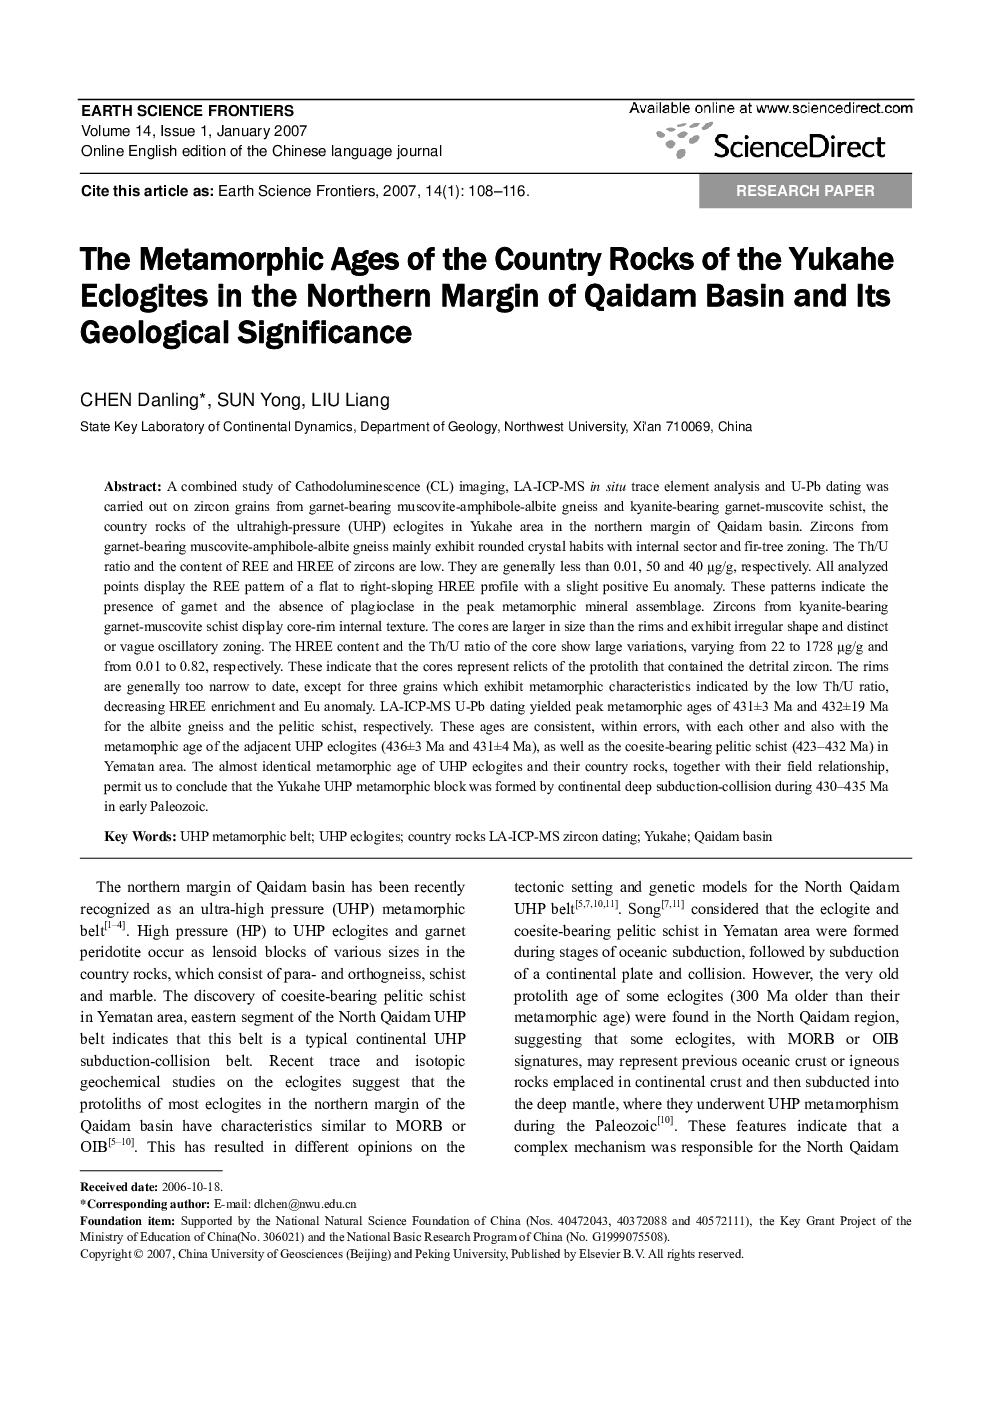 The Metamorphic Ages of the Country Rocks of the Yukahe Eclogites in the Northern Margin of Qaidam Basin and Its Geological Significance 